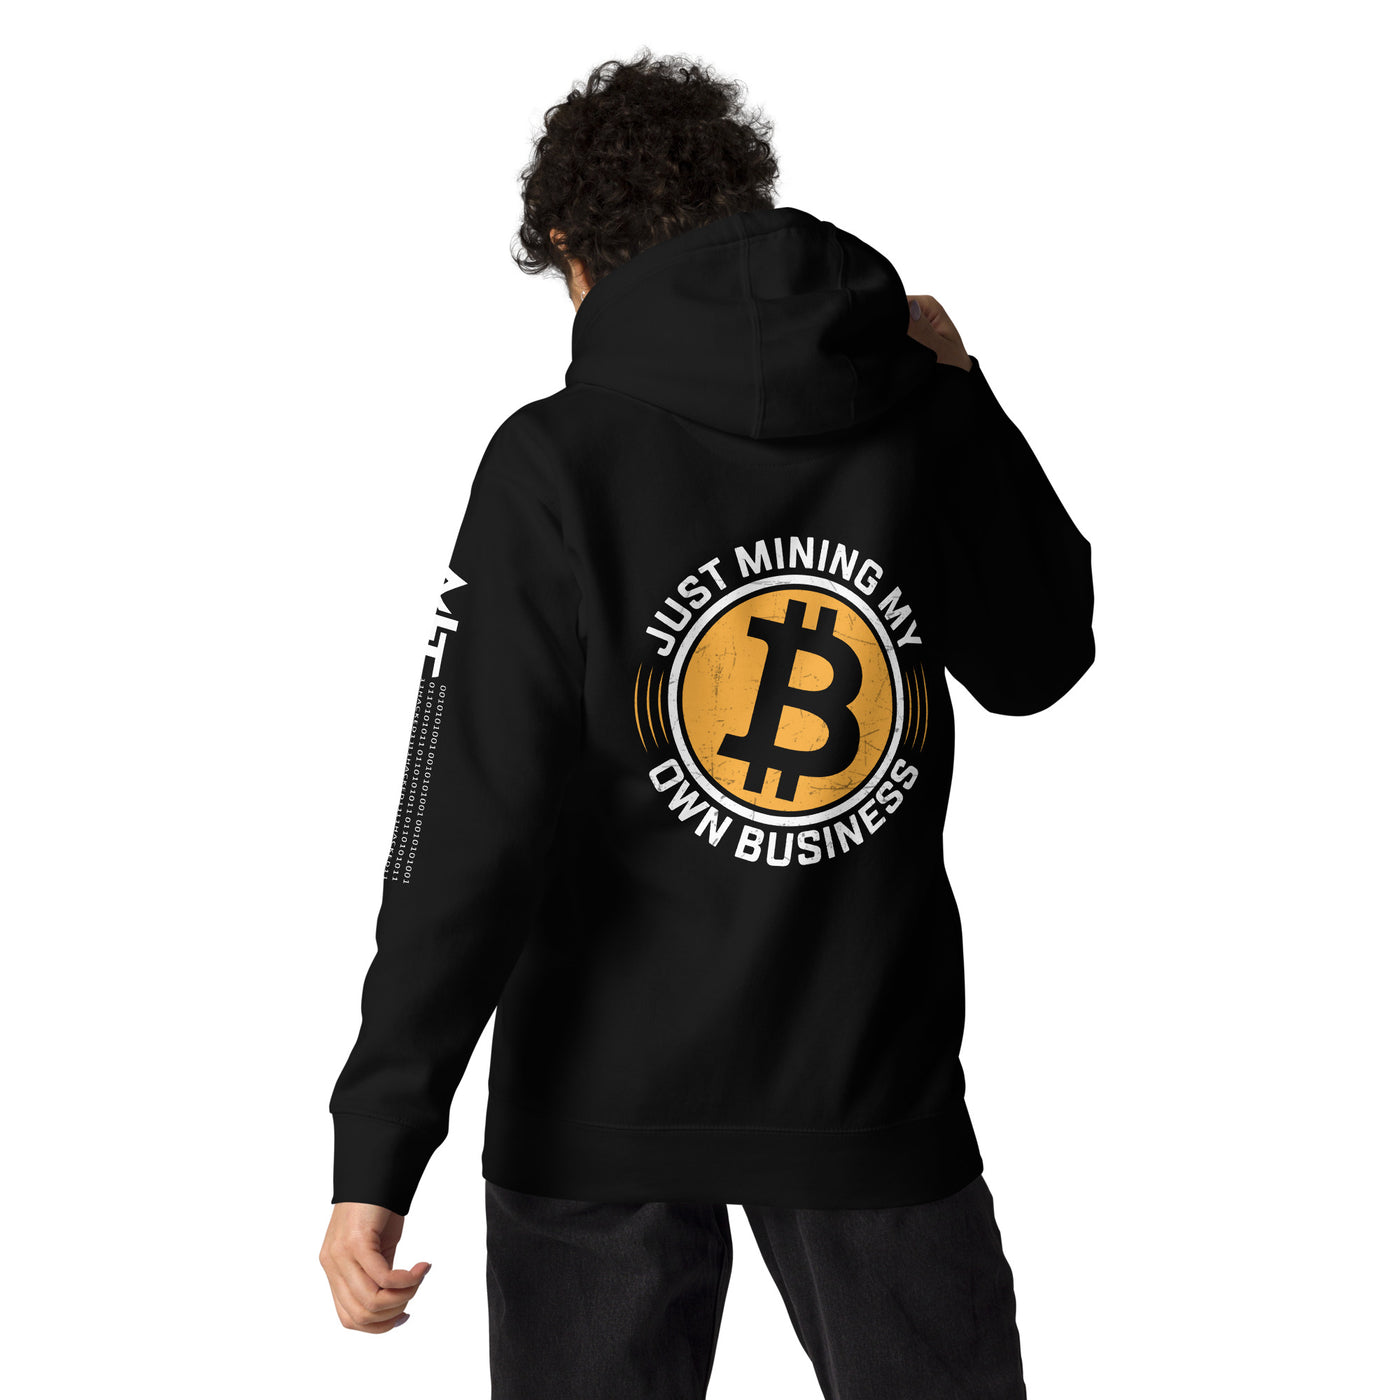 Just Mining My Own Business - Unisex Hoodie ( Back Print )